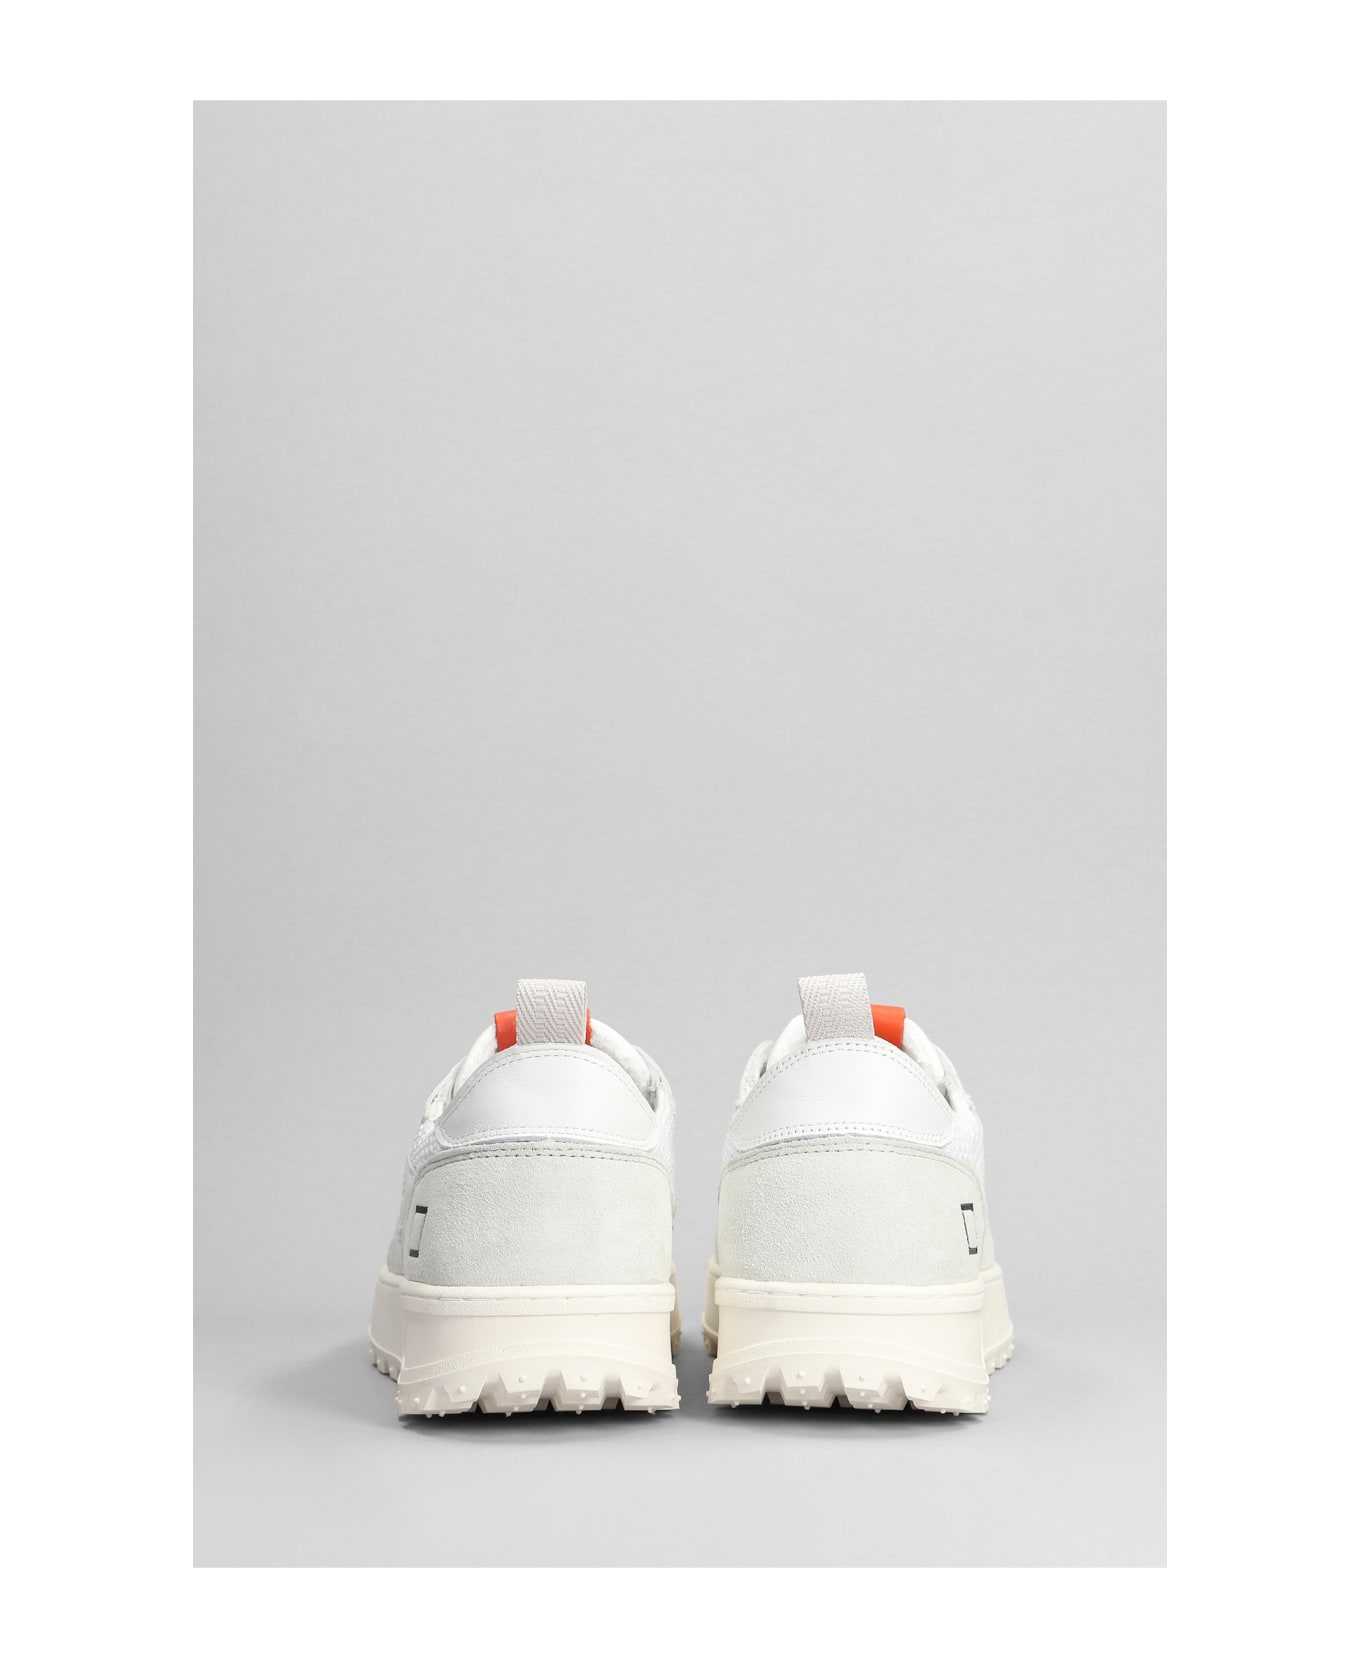 D.A.T.E. Kdue Sneakers In White Leather And Fabric - white スニーカー